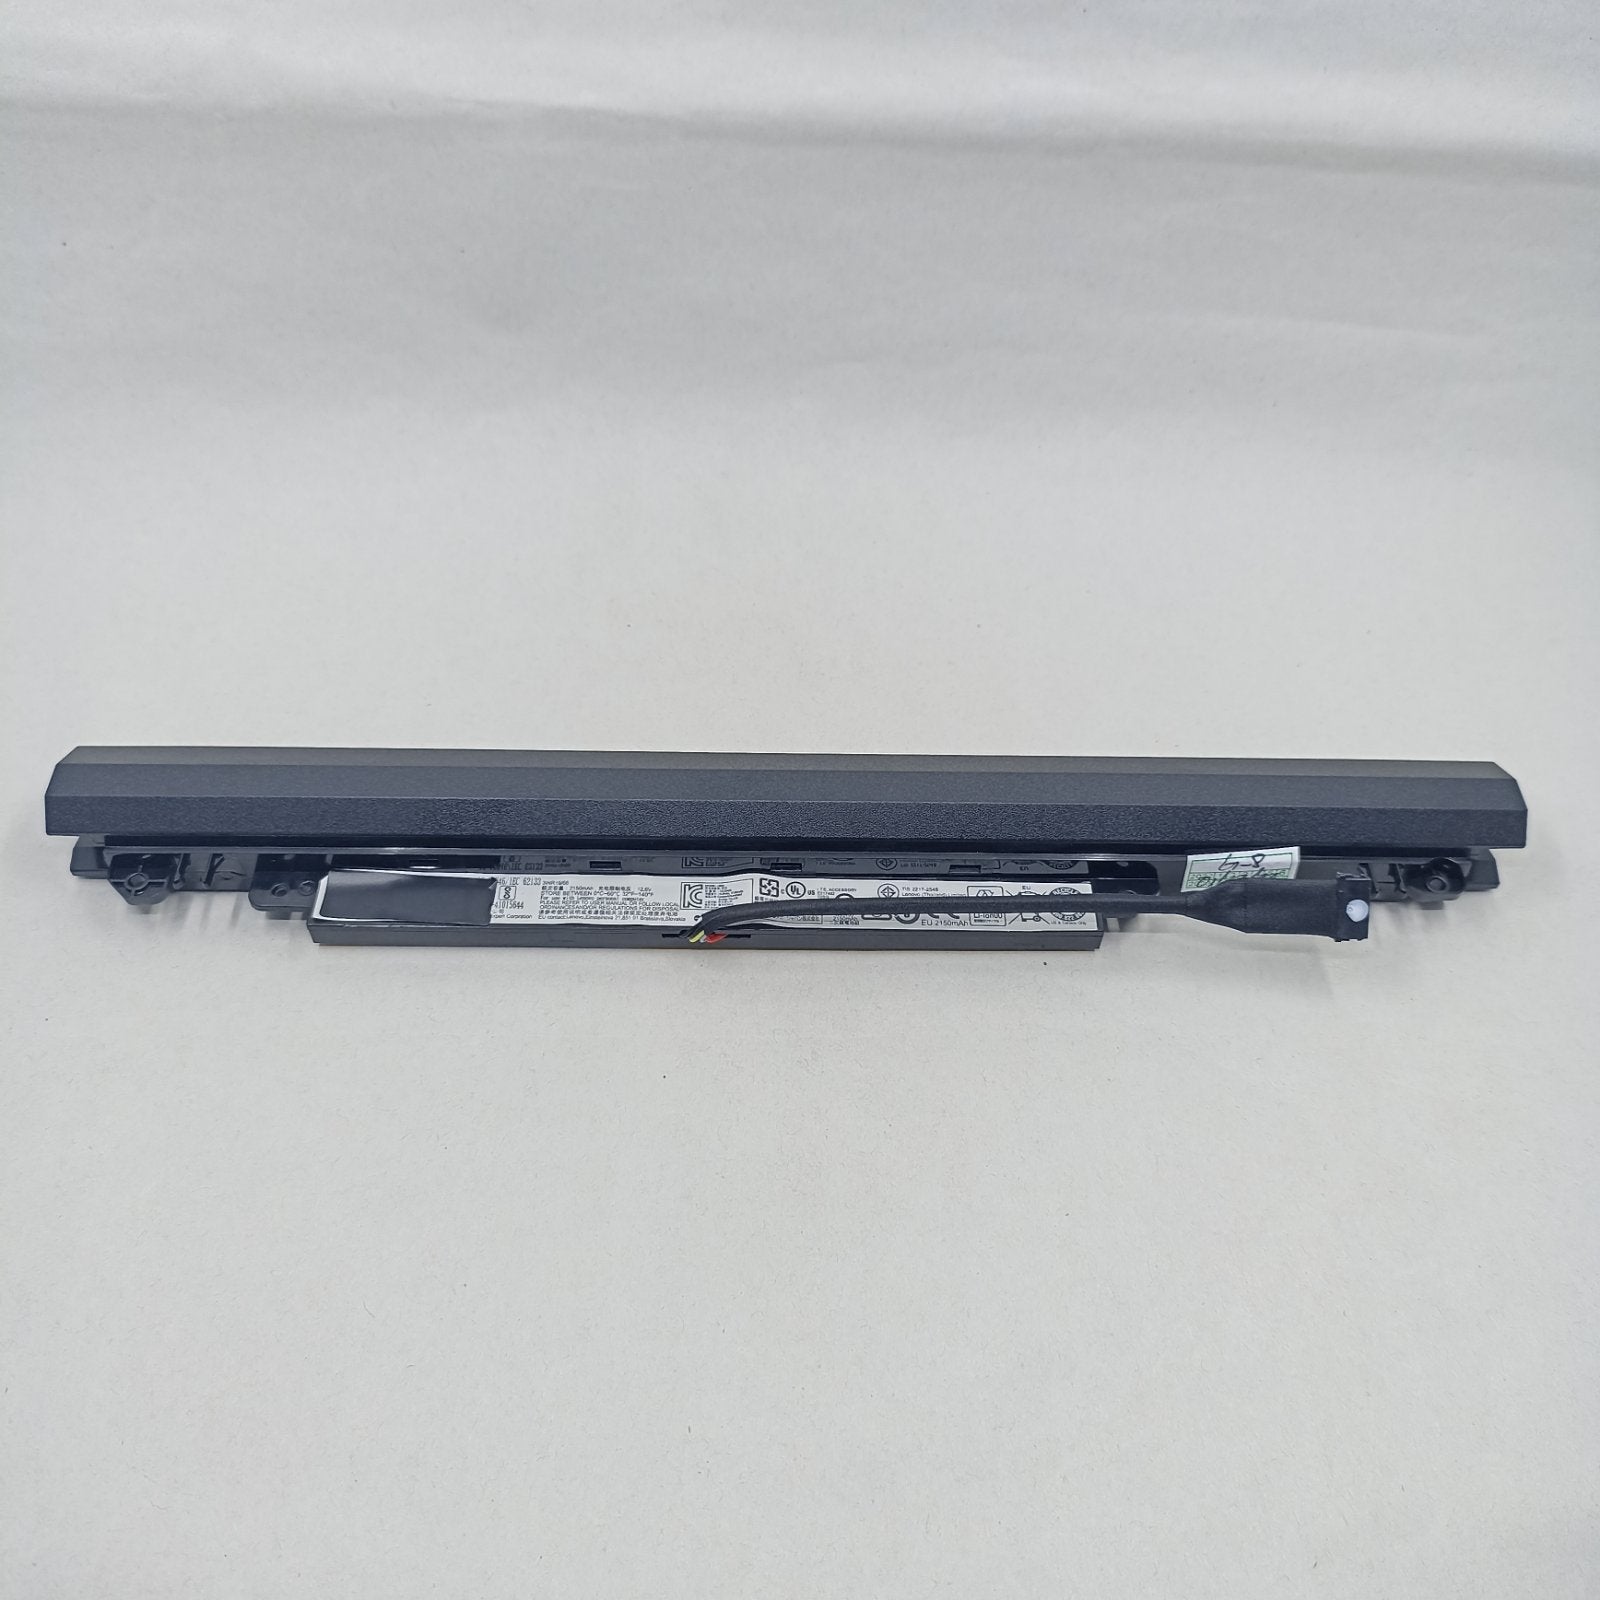 Replacement Battery for Lenovo 110-14IBR A1